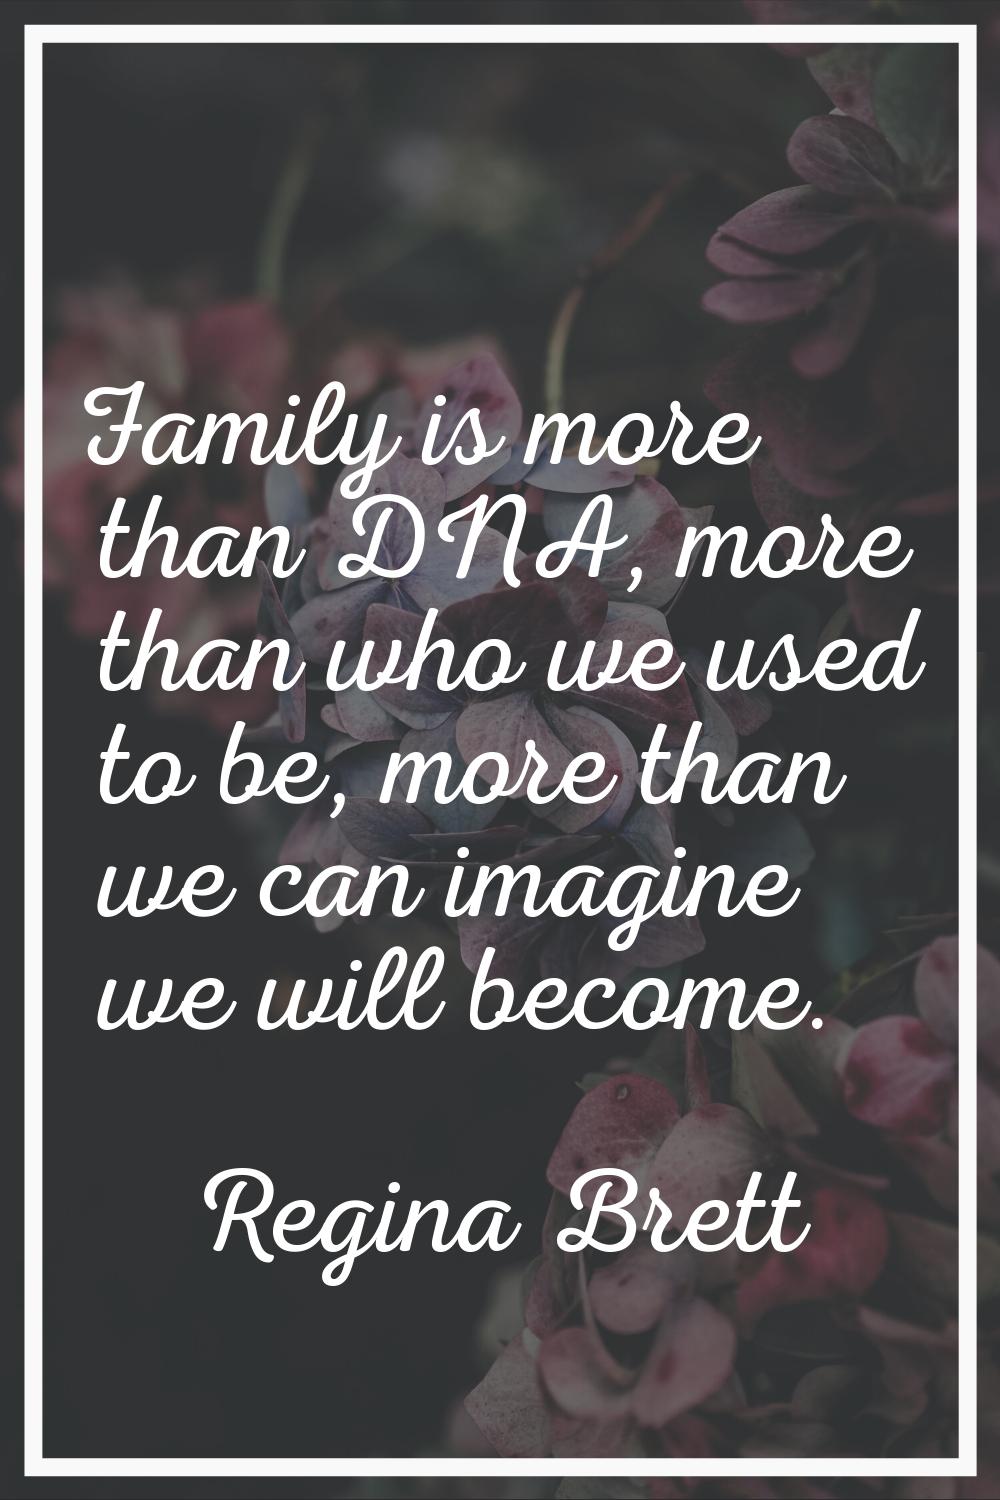 Family is more than DNA, more than who we used to be, more than we can imagine we will become.